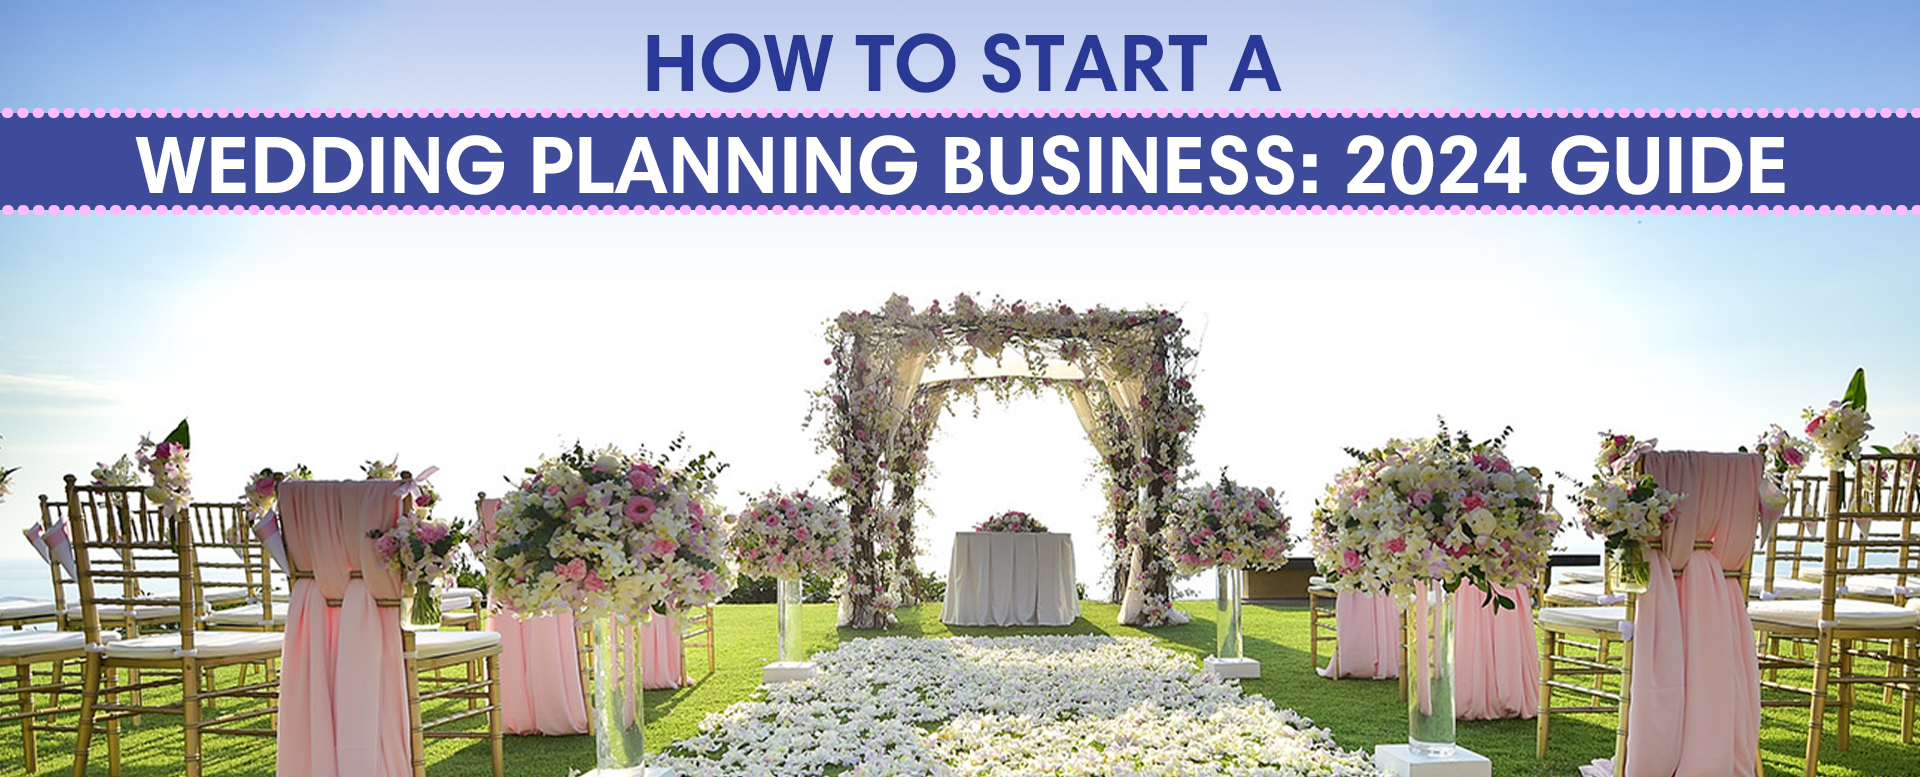 How to Start a Wedding Planning Business: 2024 Guide